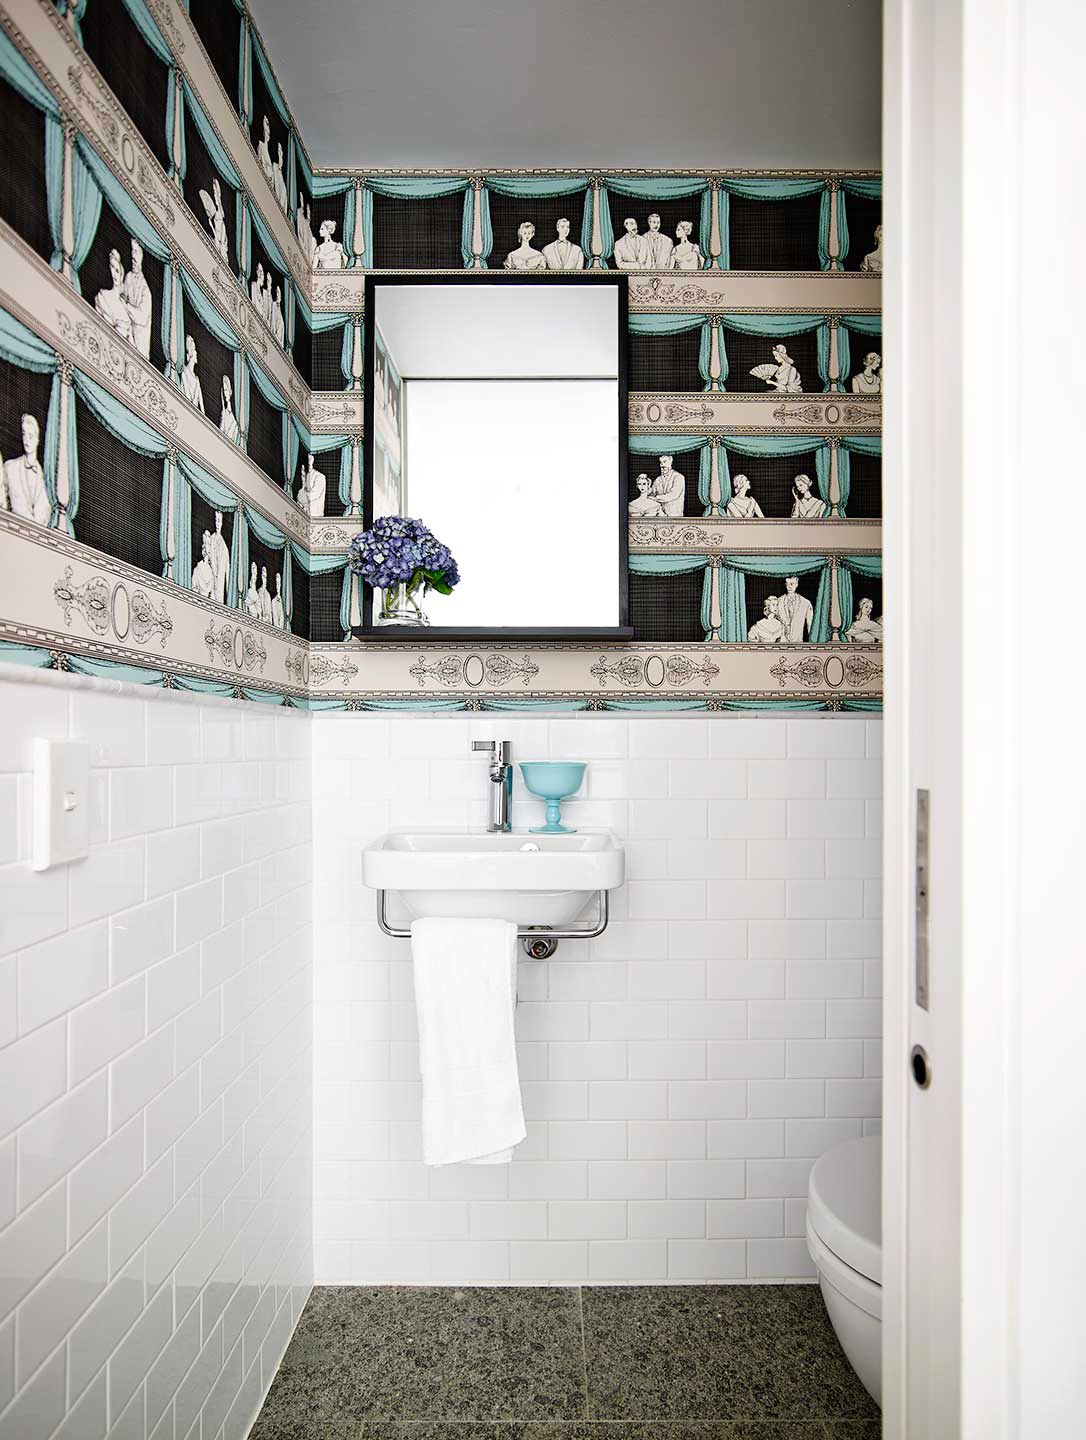 Bathroom Wallpapers 10 Of The Best - typikalempire